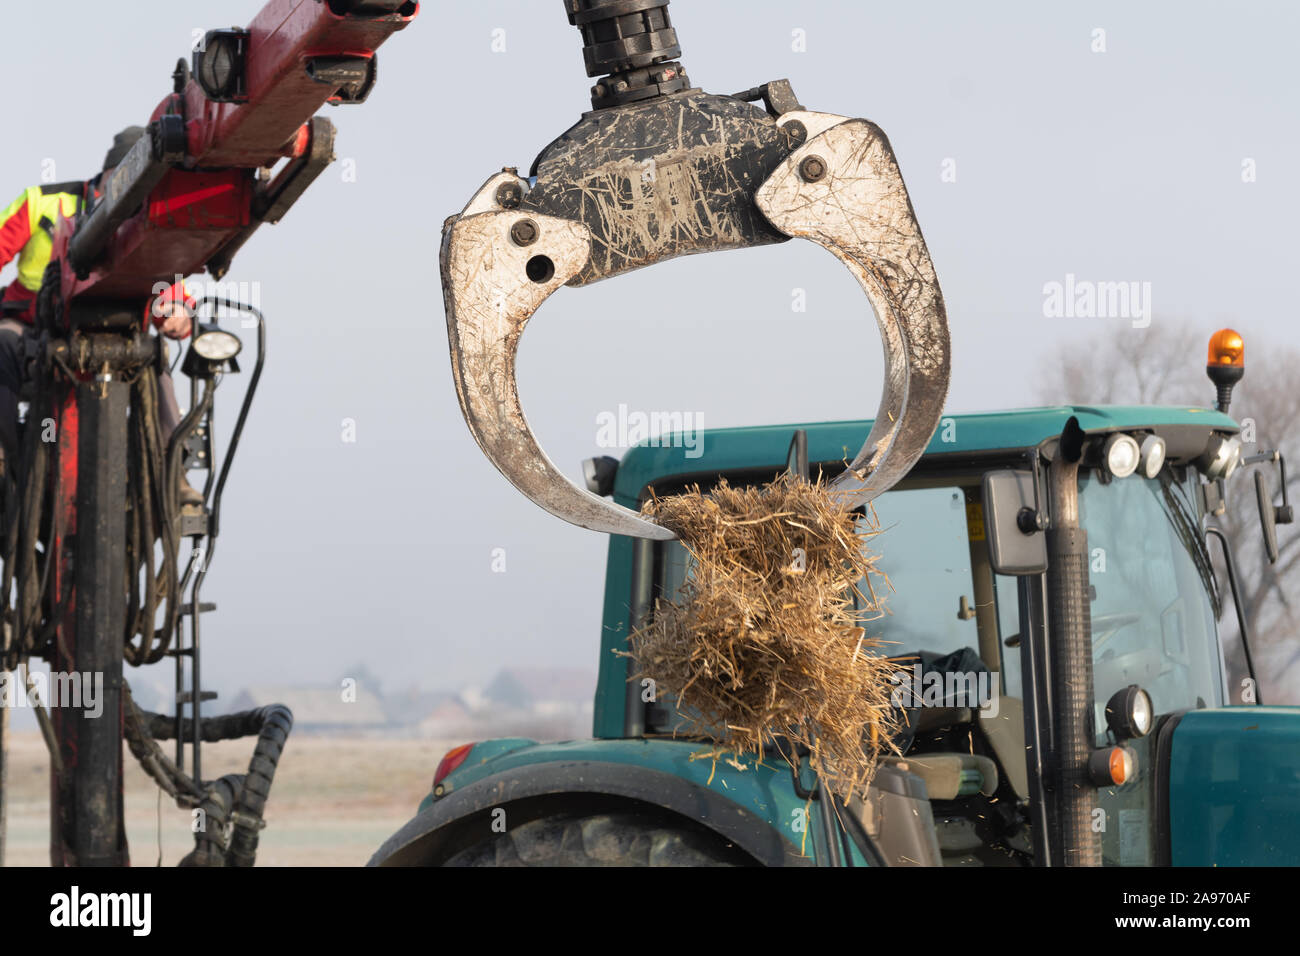 Operator of forestry tractor crane with grapple tossing mulch straw on the field. Agriculture, farming, forestry and mechanization concepts. Stock Photo